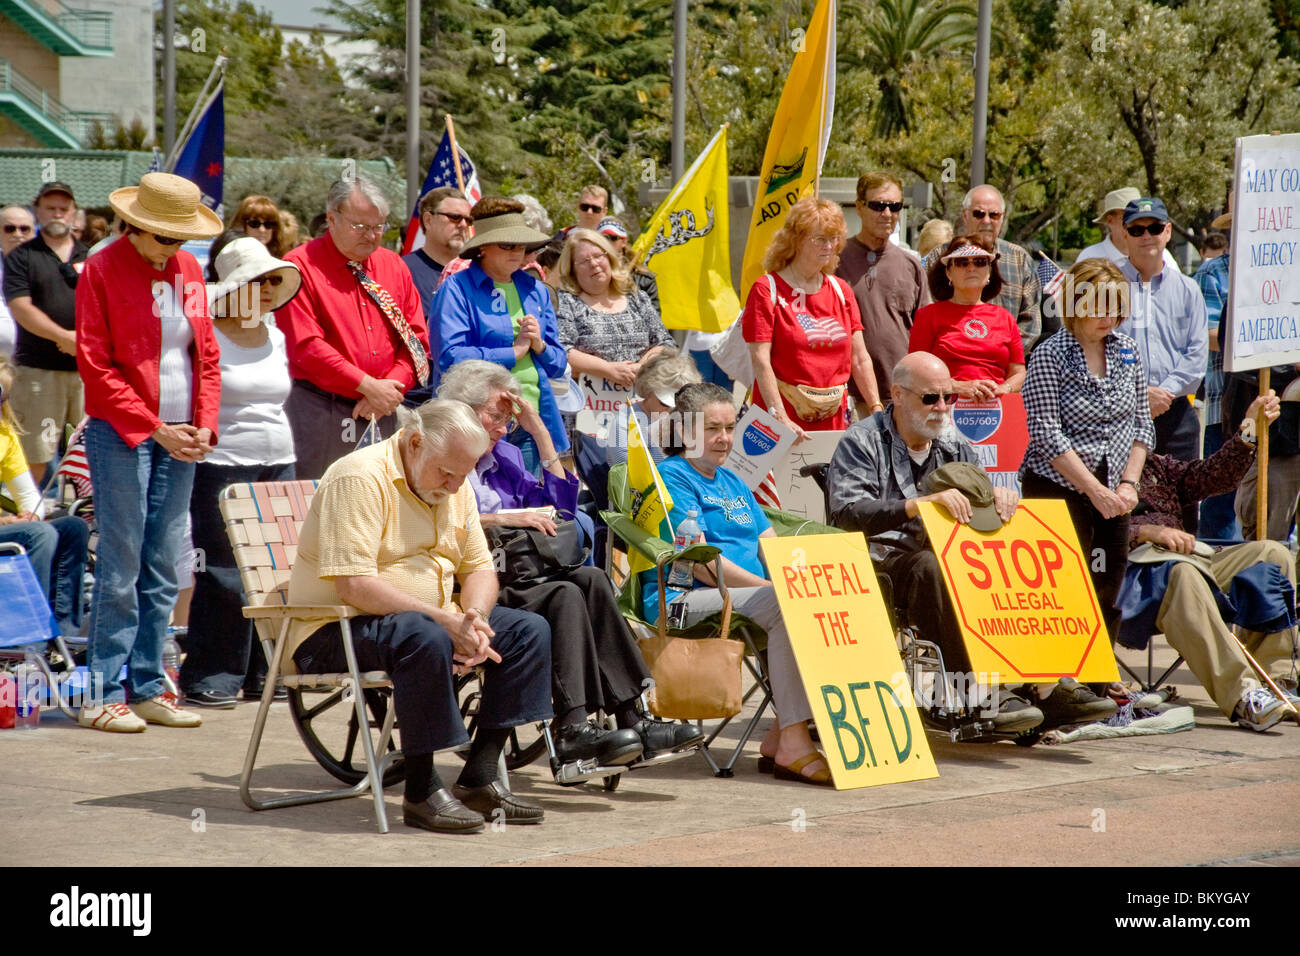 Anti-government protesters pray at a 'Tea Party' rally on April 15 (Tax Day) in Santa Ana, California. Stock Photo